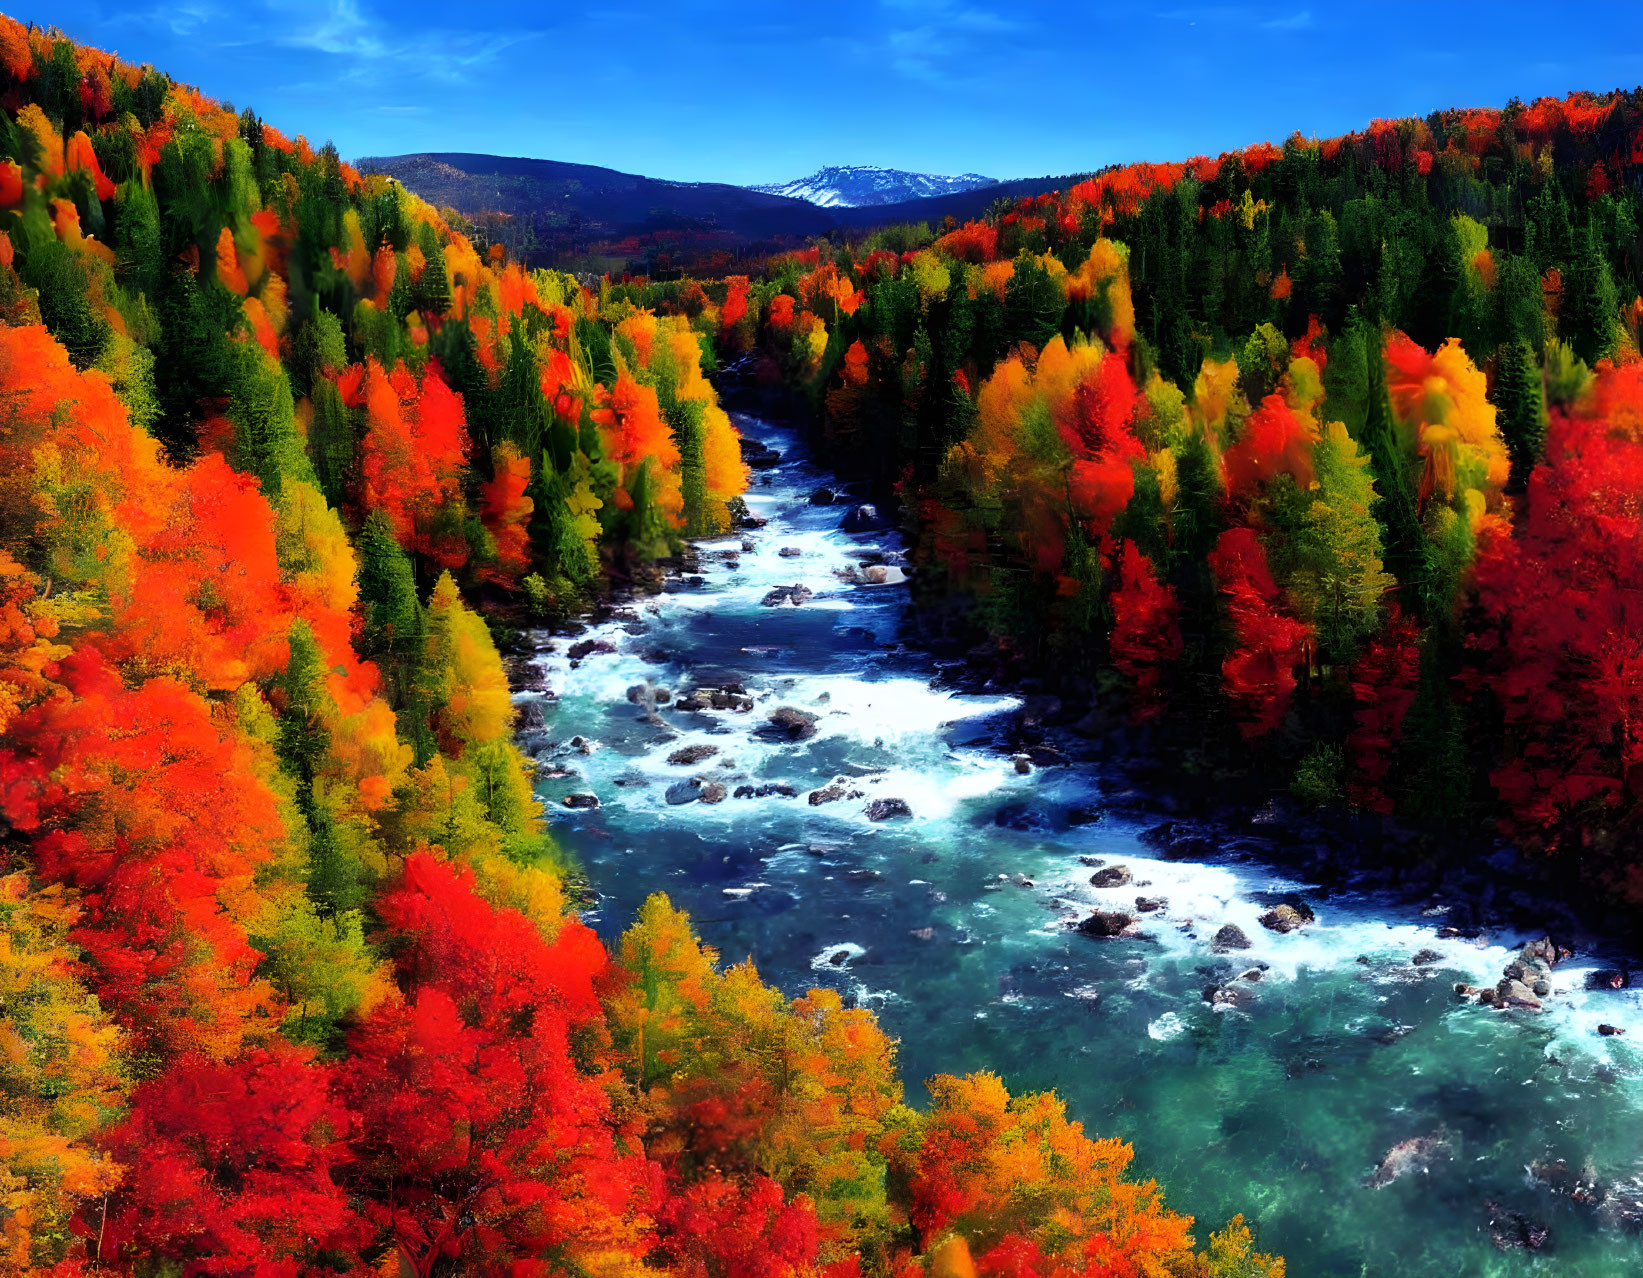 Colorful autumn landscape with river and forests under blue sky